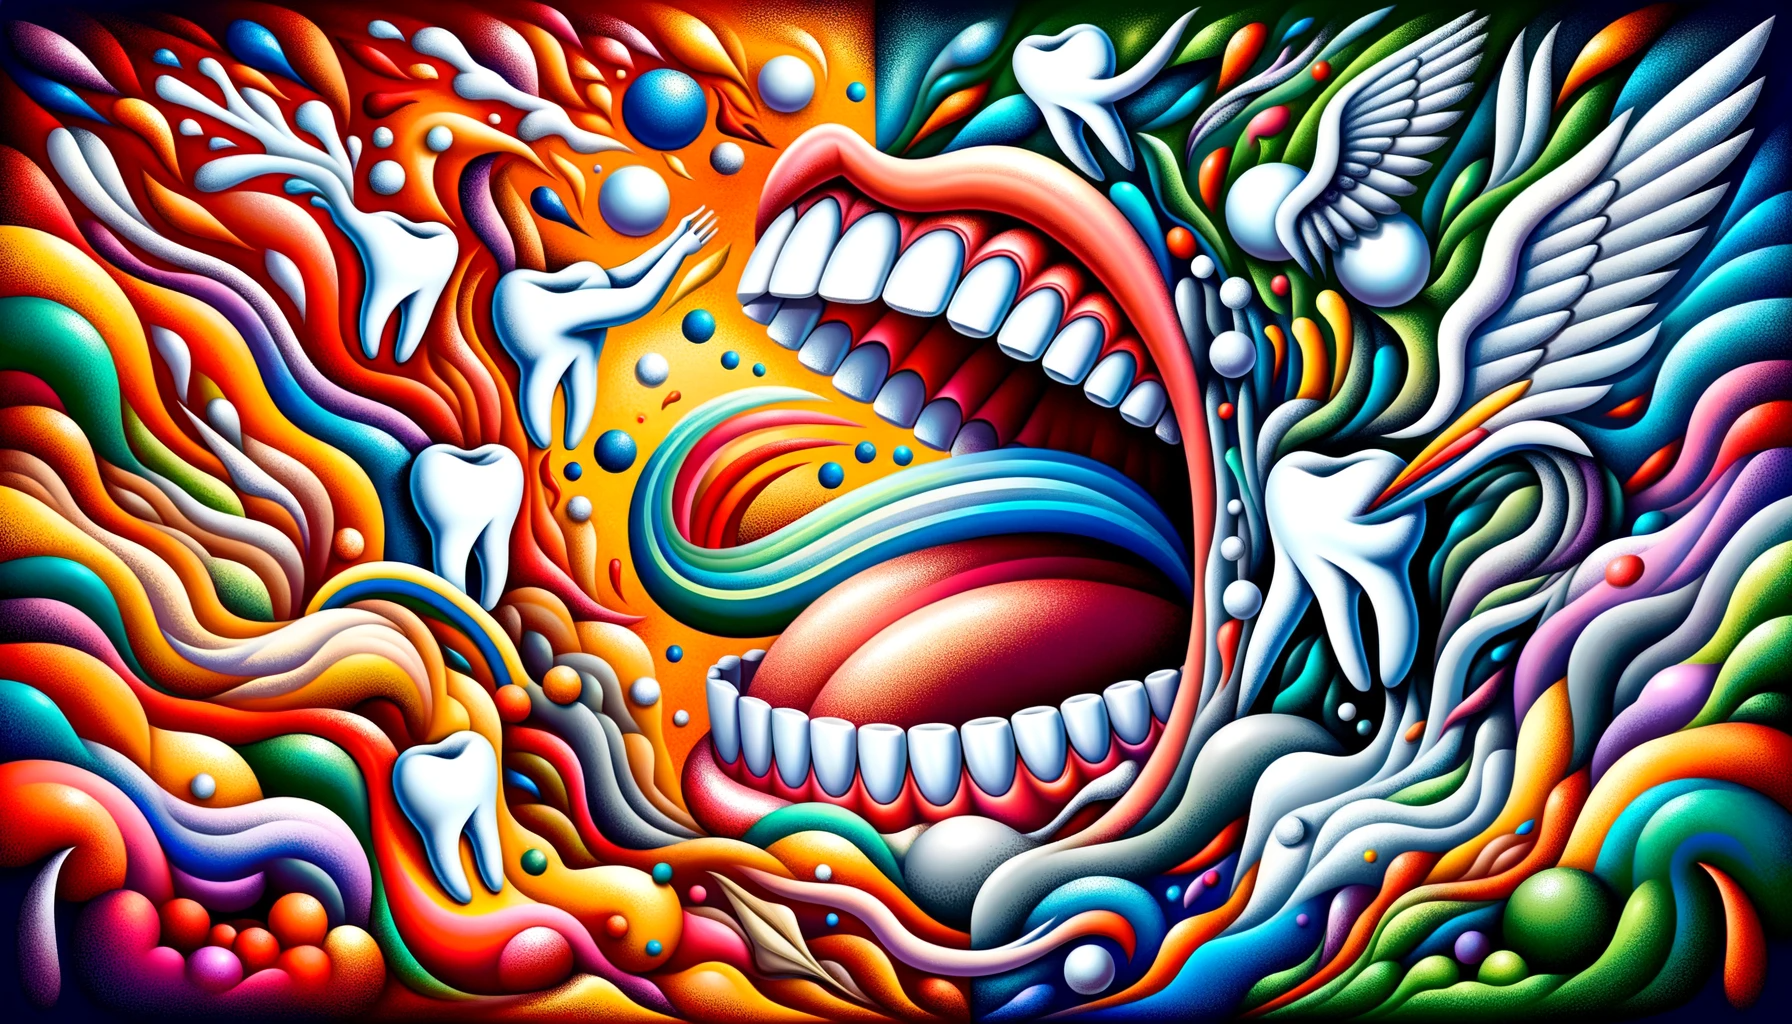 An abstract art piece that symbolically represents the tussle between bad breath and fresh breath, using vibrant colors and imaginative imagery.